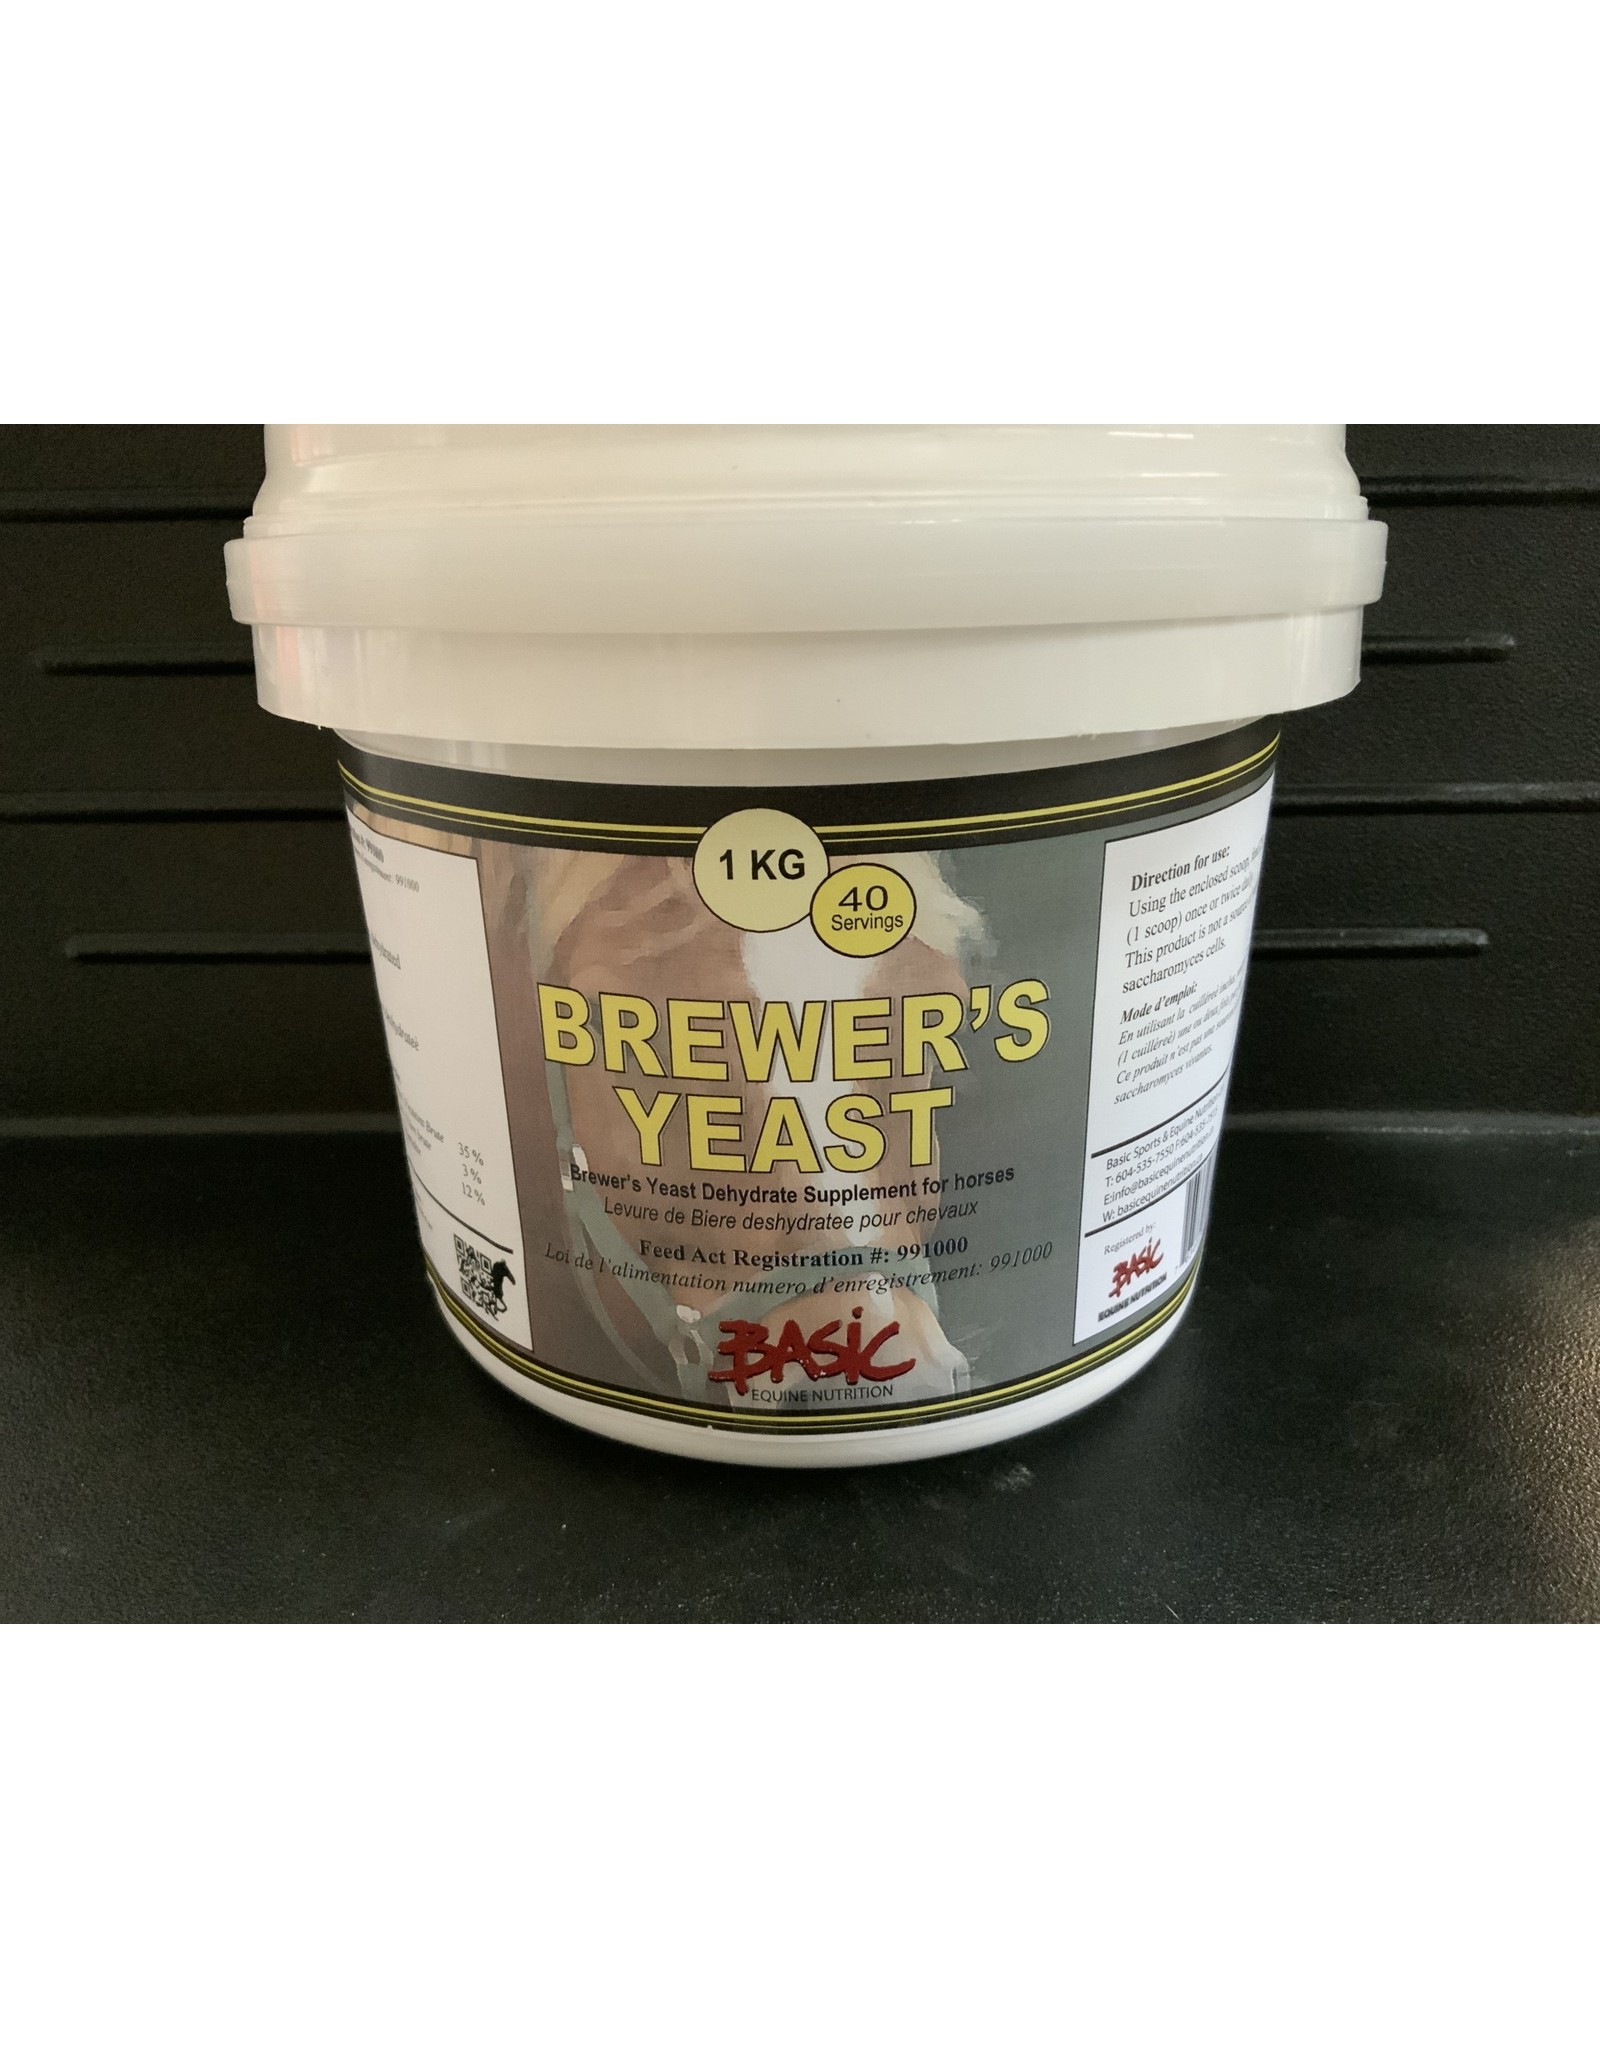 Brewers Yeast  1kg TEN640 - pro-biotic supplement promotes gut health, improving digestion and nutrient availability. Brewer’s Yeast is an excellent source of all the B complex vitamins.